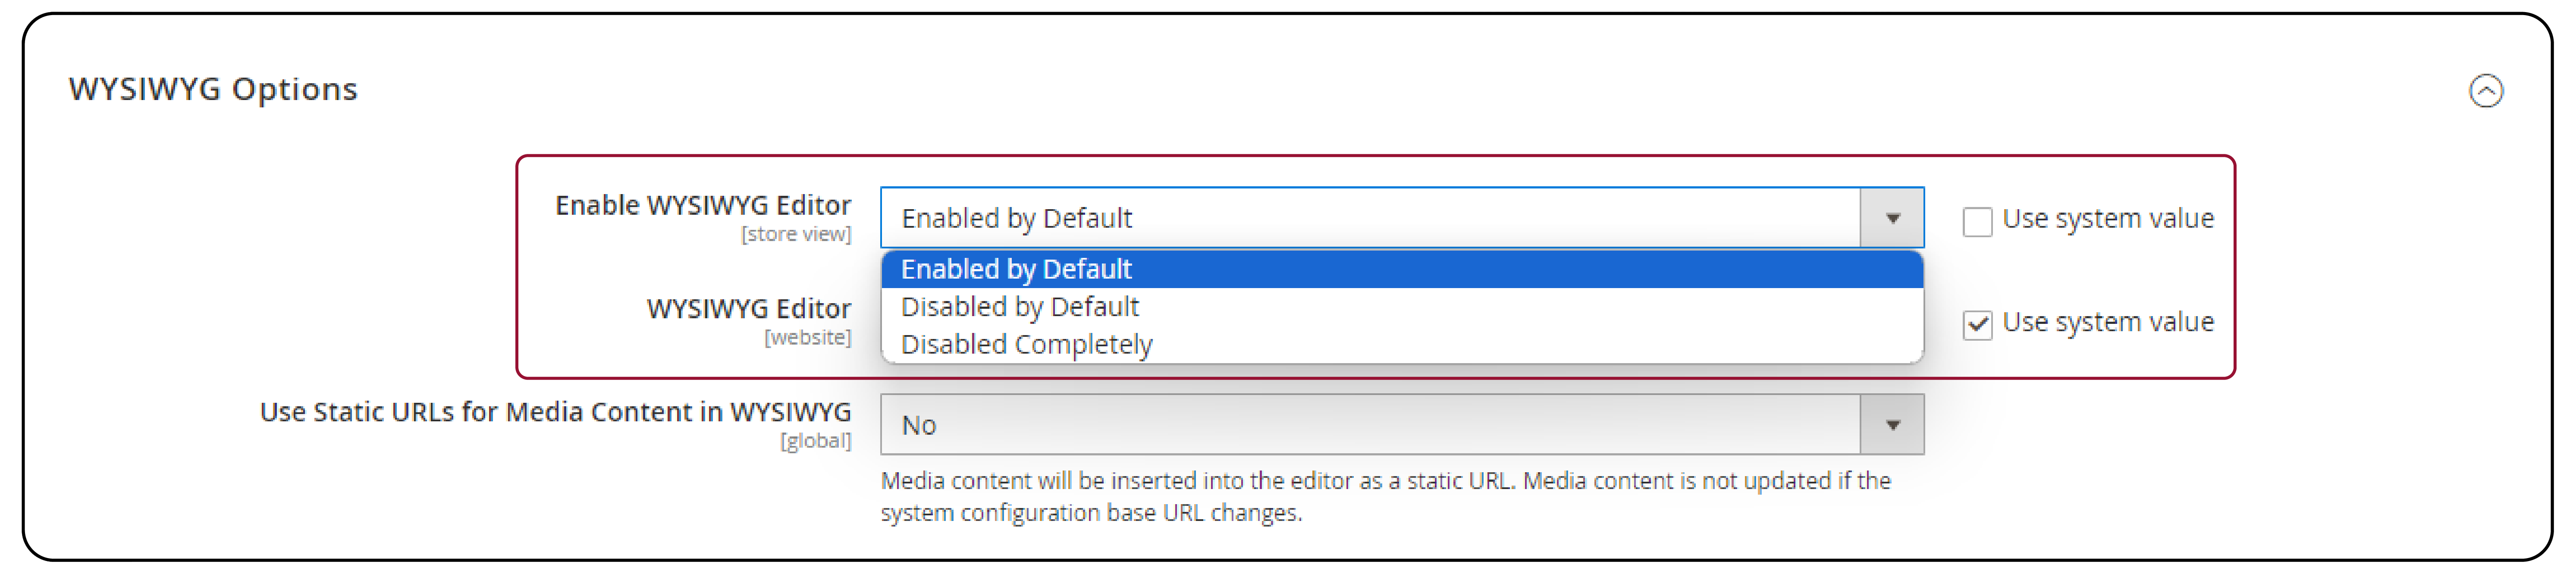 Selecting default settings for WYSIWYG Editor in Magento 2